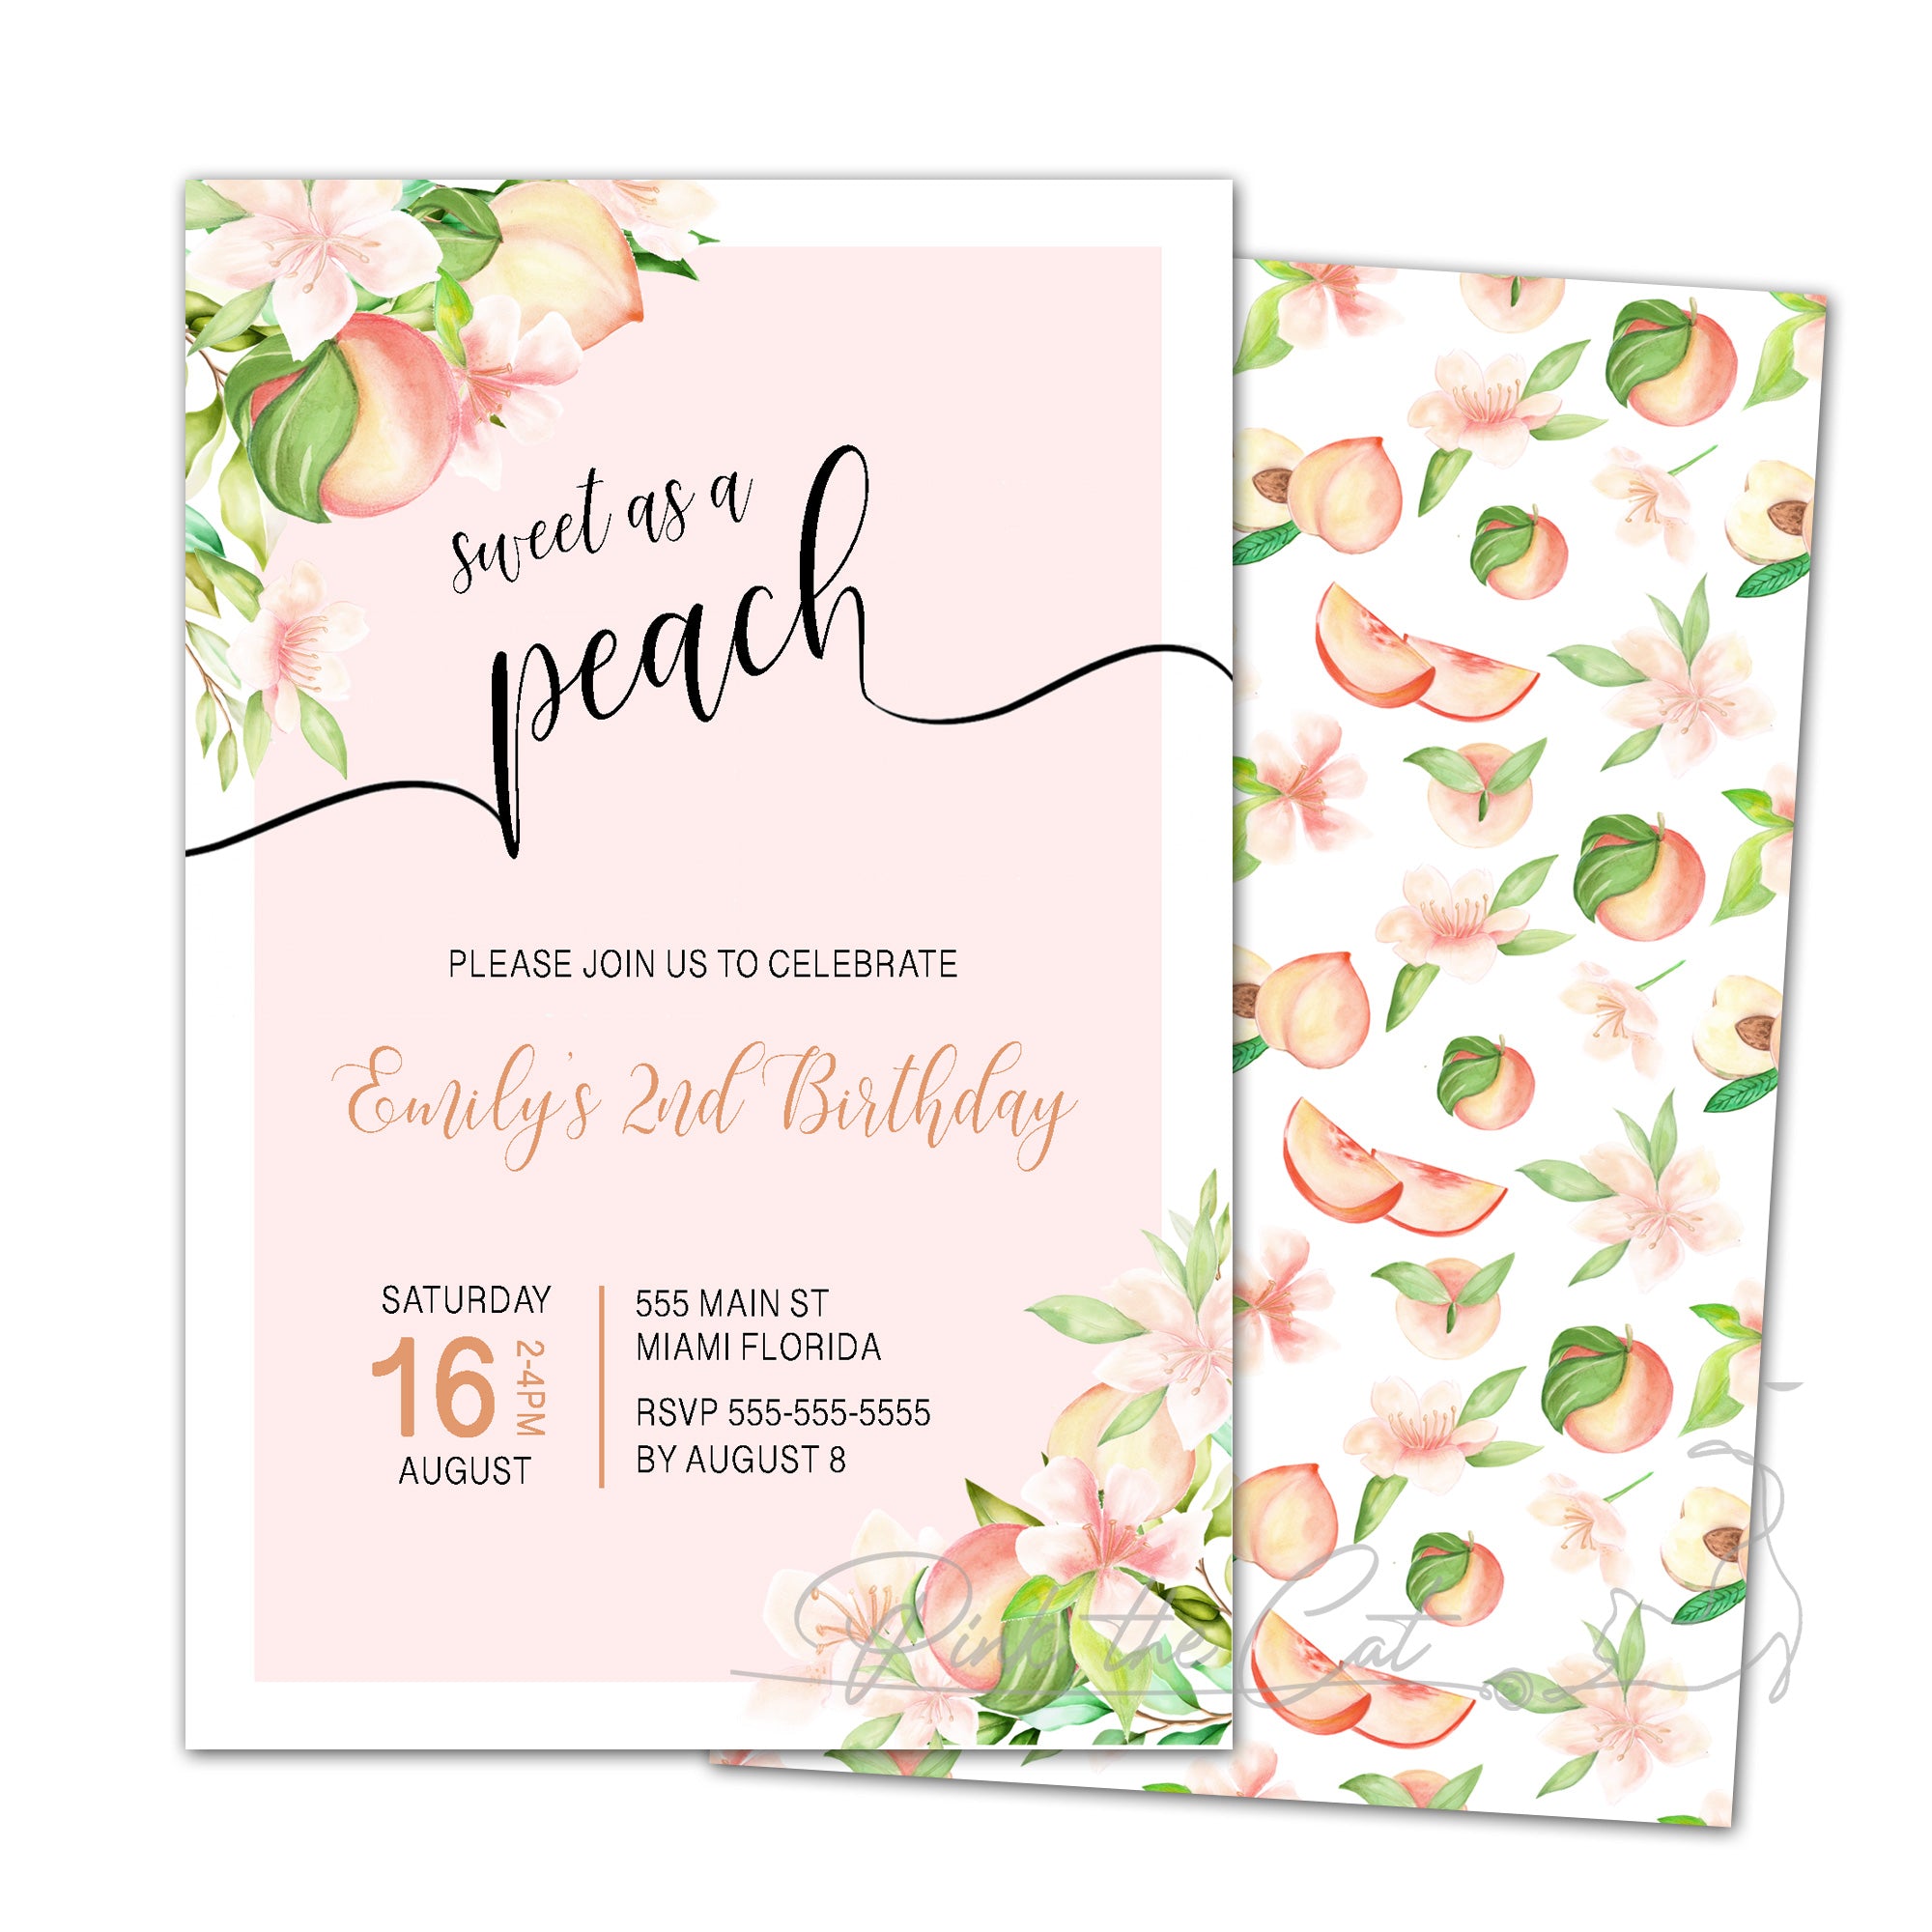 Sweet as a peach girl birthday party invitation blush pink 